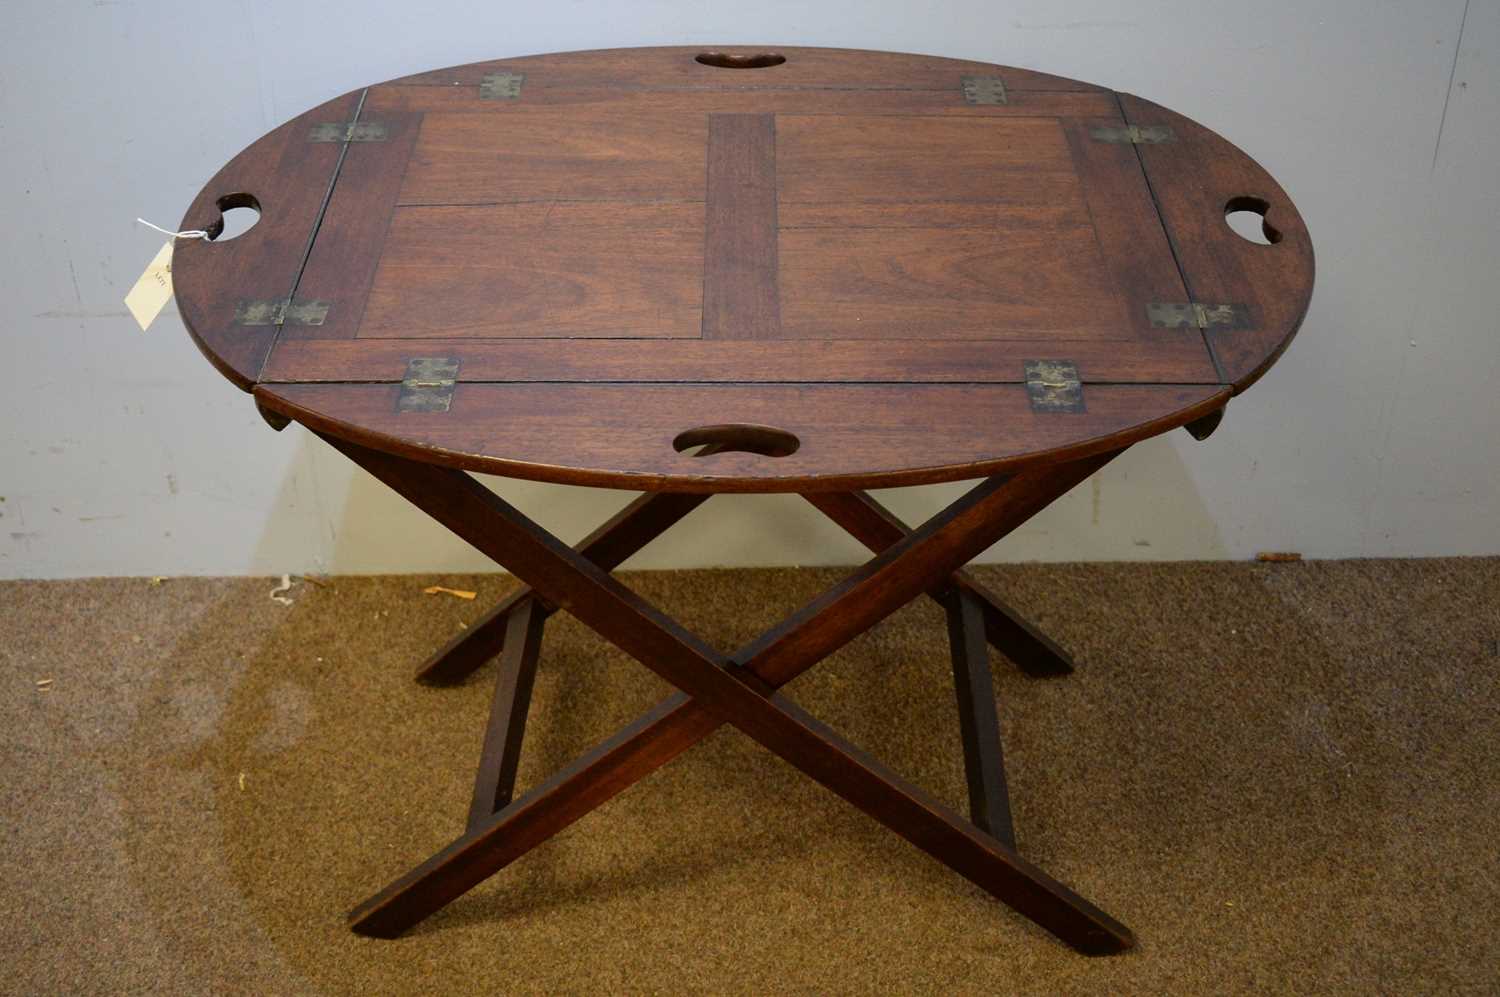 Lot 5 - 19/20th C mahogany butler's tray on stand.